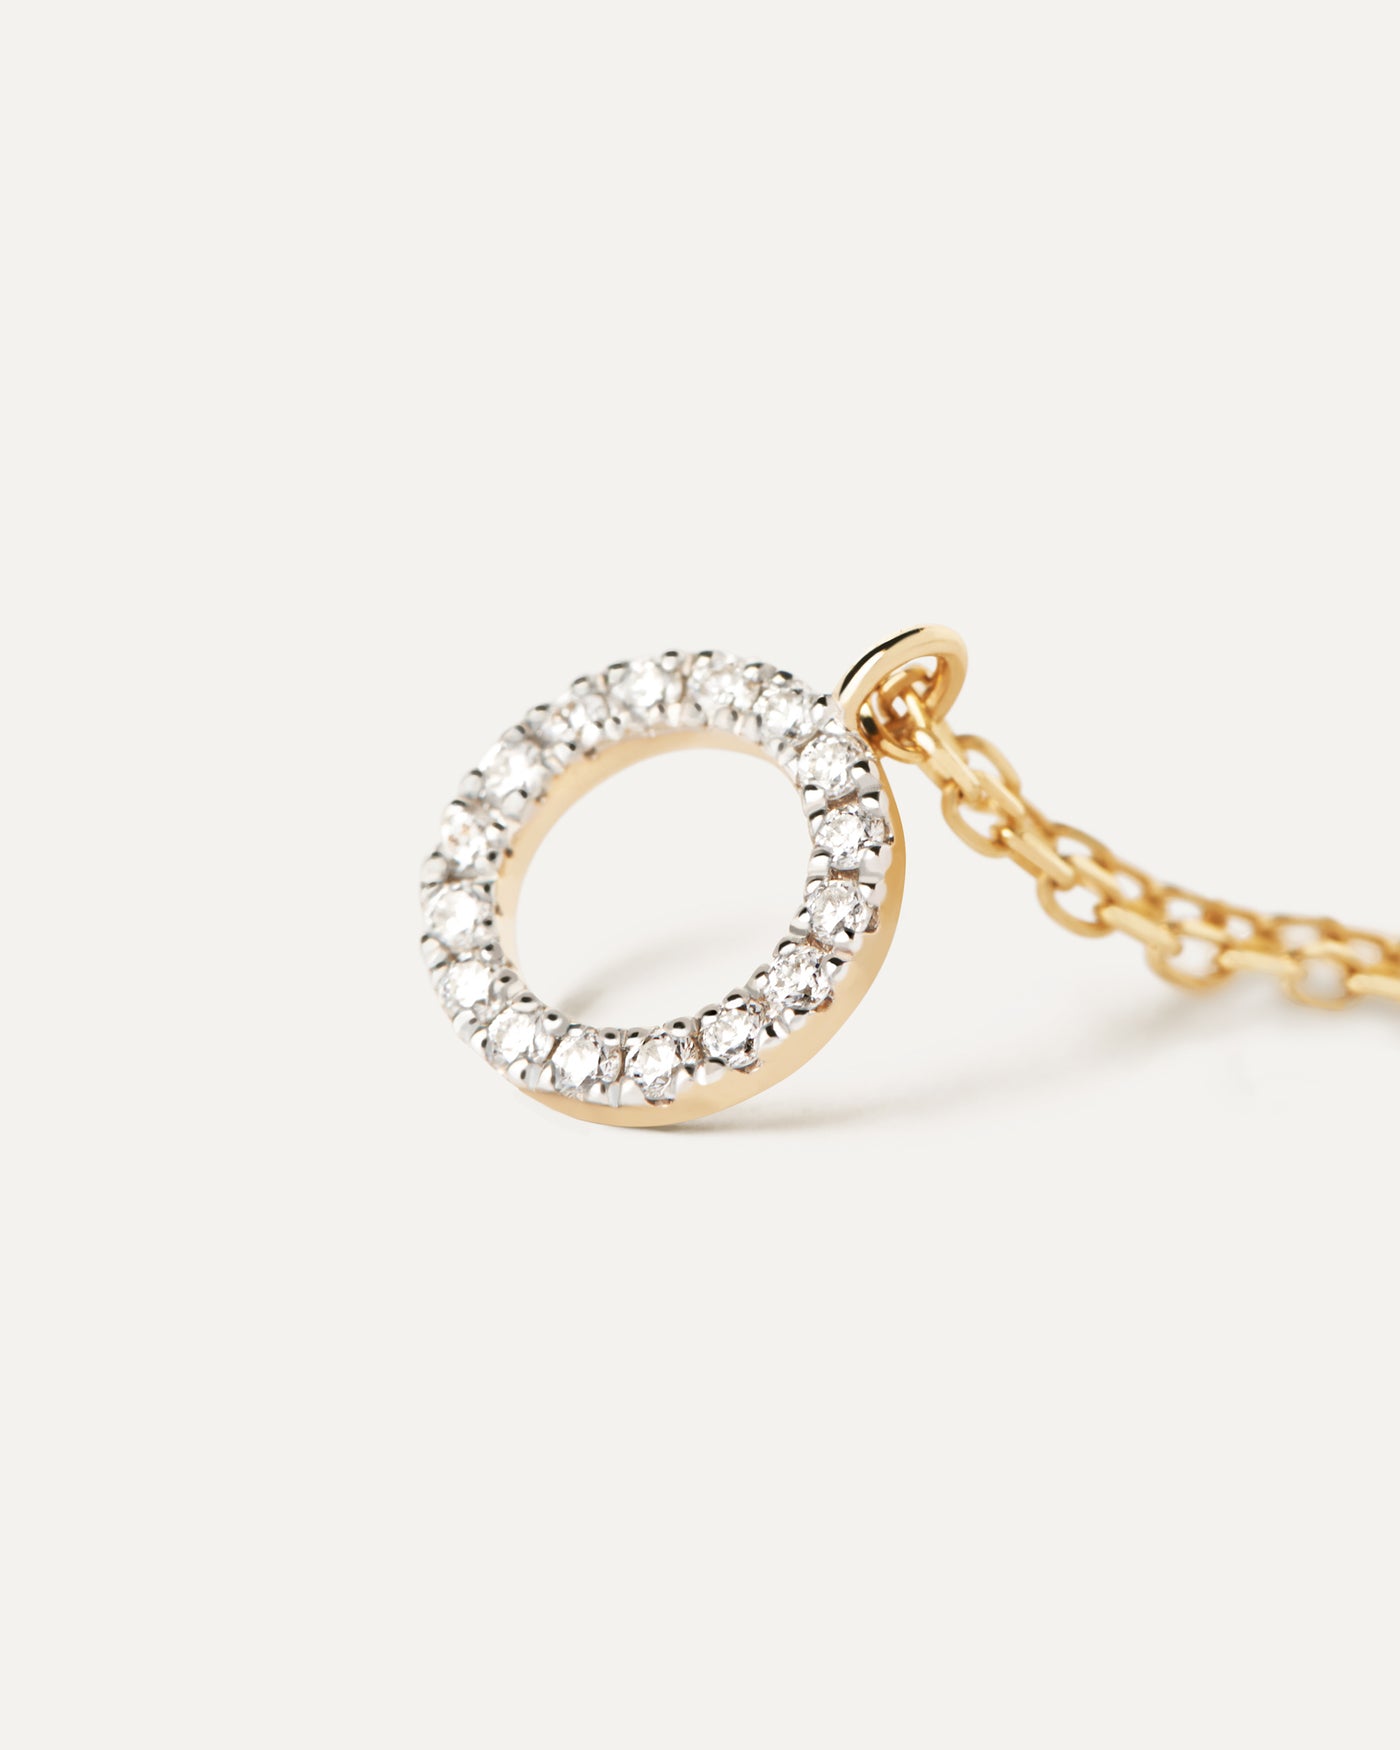 Diamonds and gold Circle necklace. Solid yellow gold necklace with a circular pendant with lab-grown diamonds of 0.06 carats. Get the latest arrival from PDPAOLA. Place your order safely and get this Best Seller.